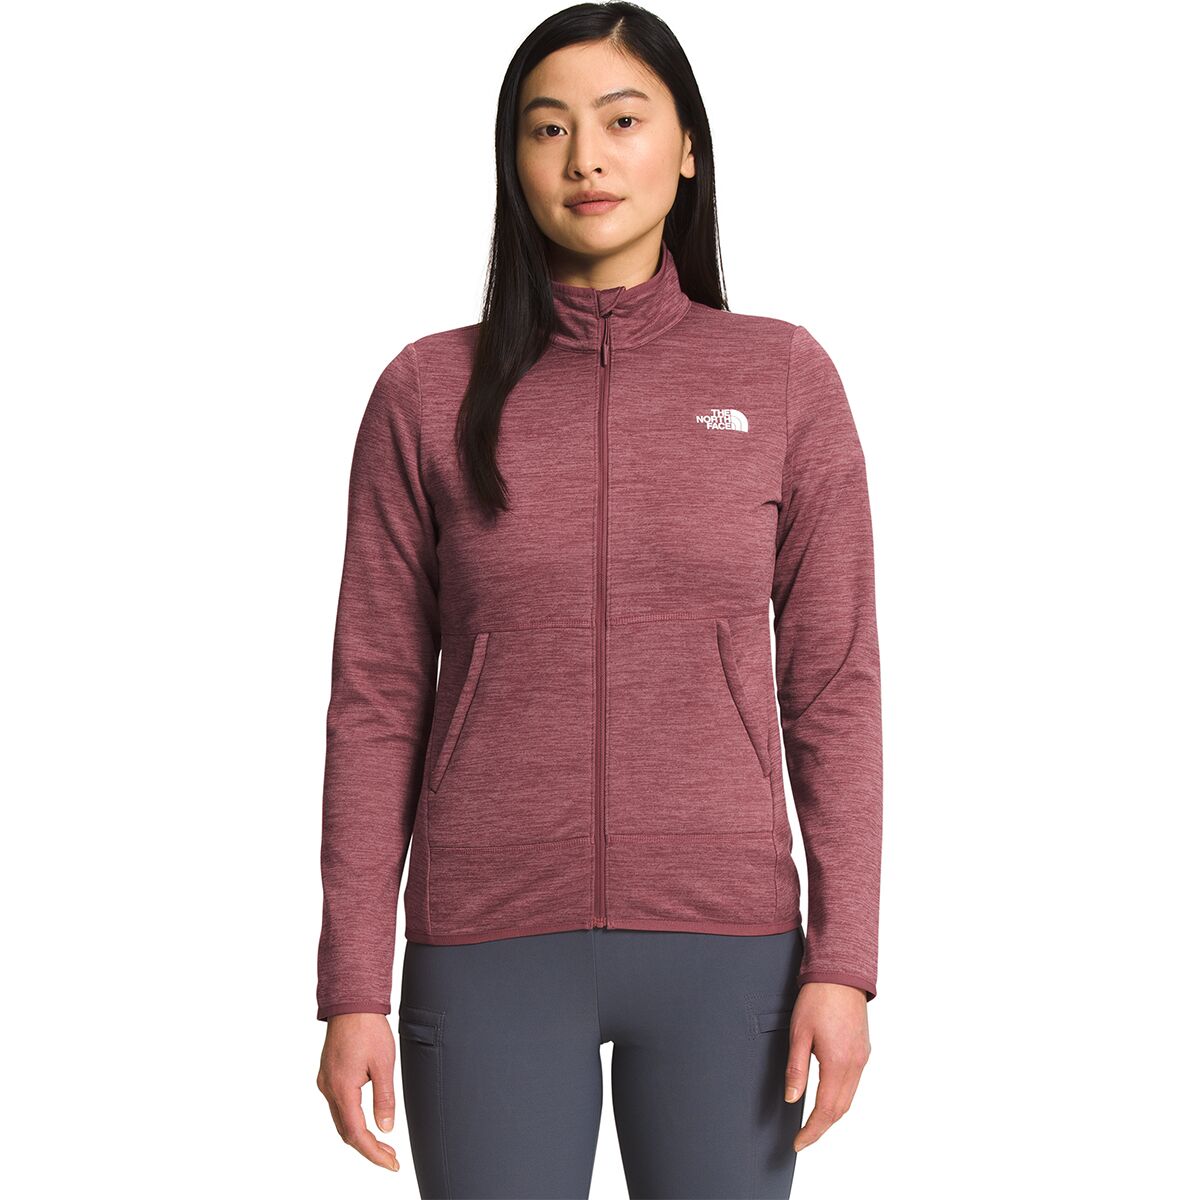 The North Face Women's Tops | Backcountry.com